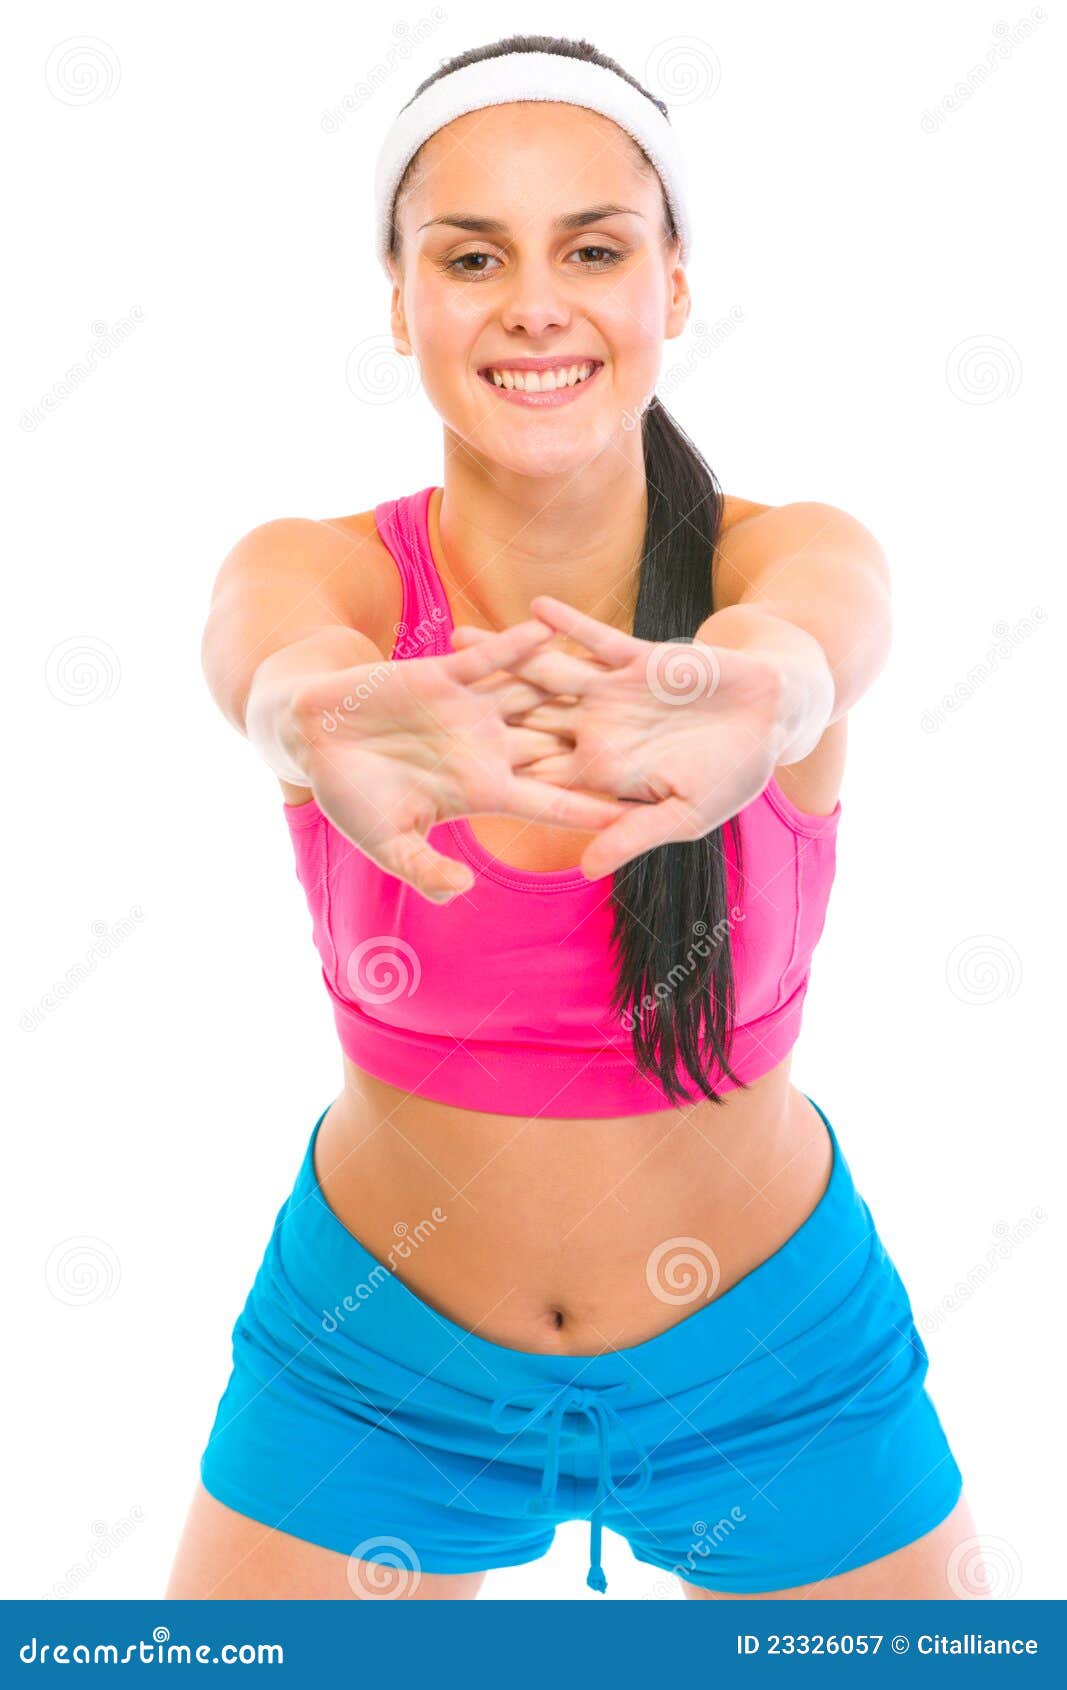 Healthy girl working out stock image. Image of working - 23326057